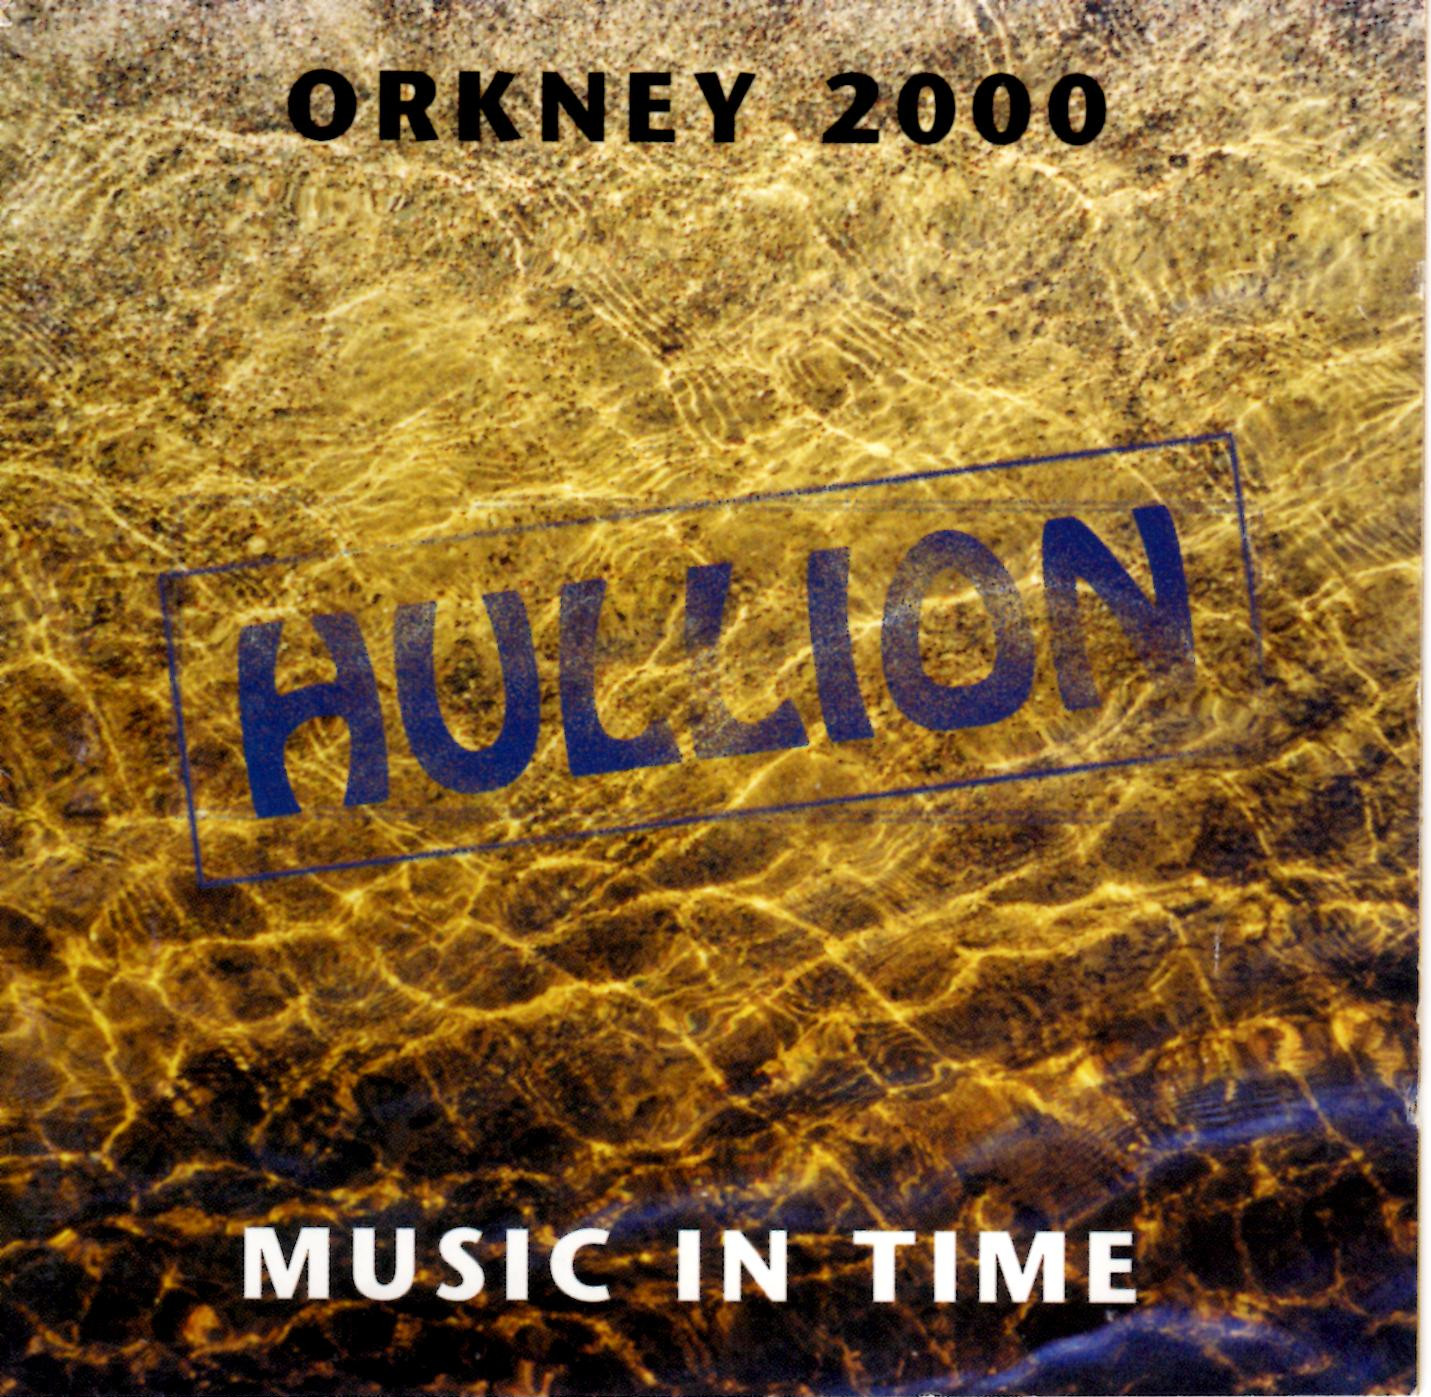 Orkney 2000